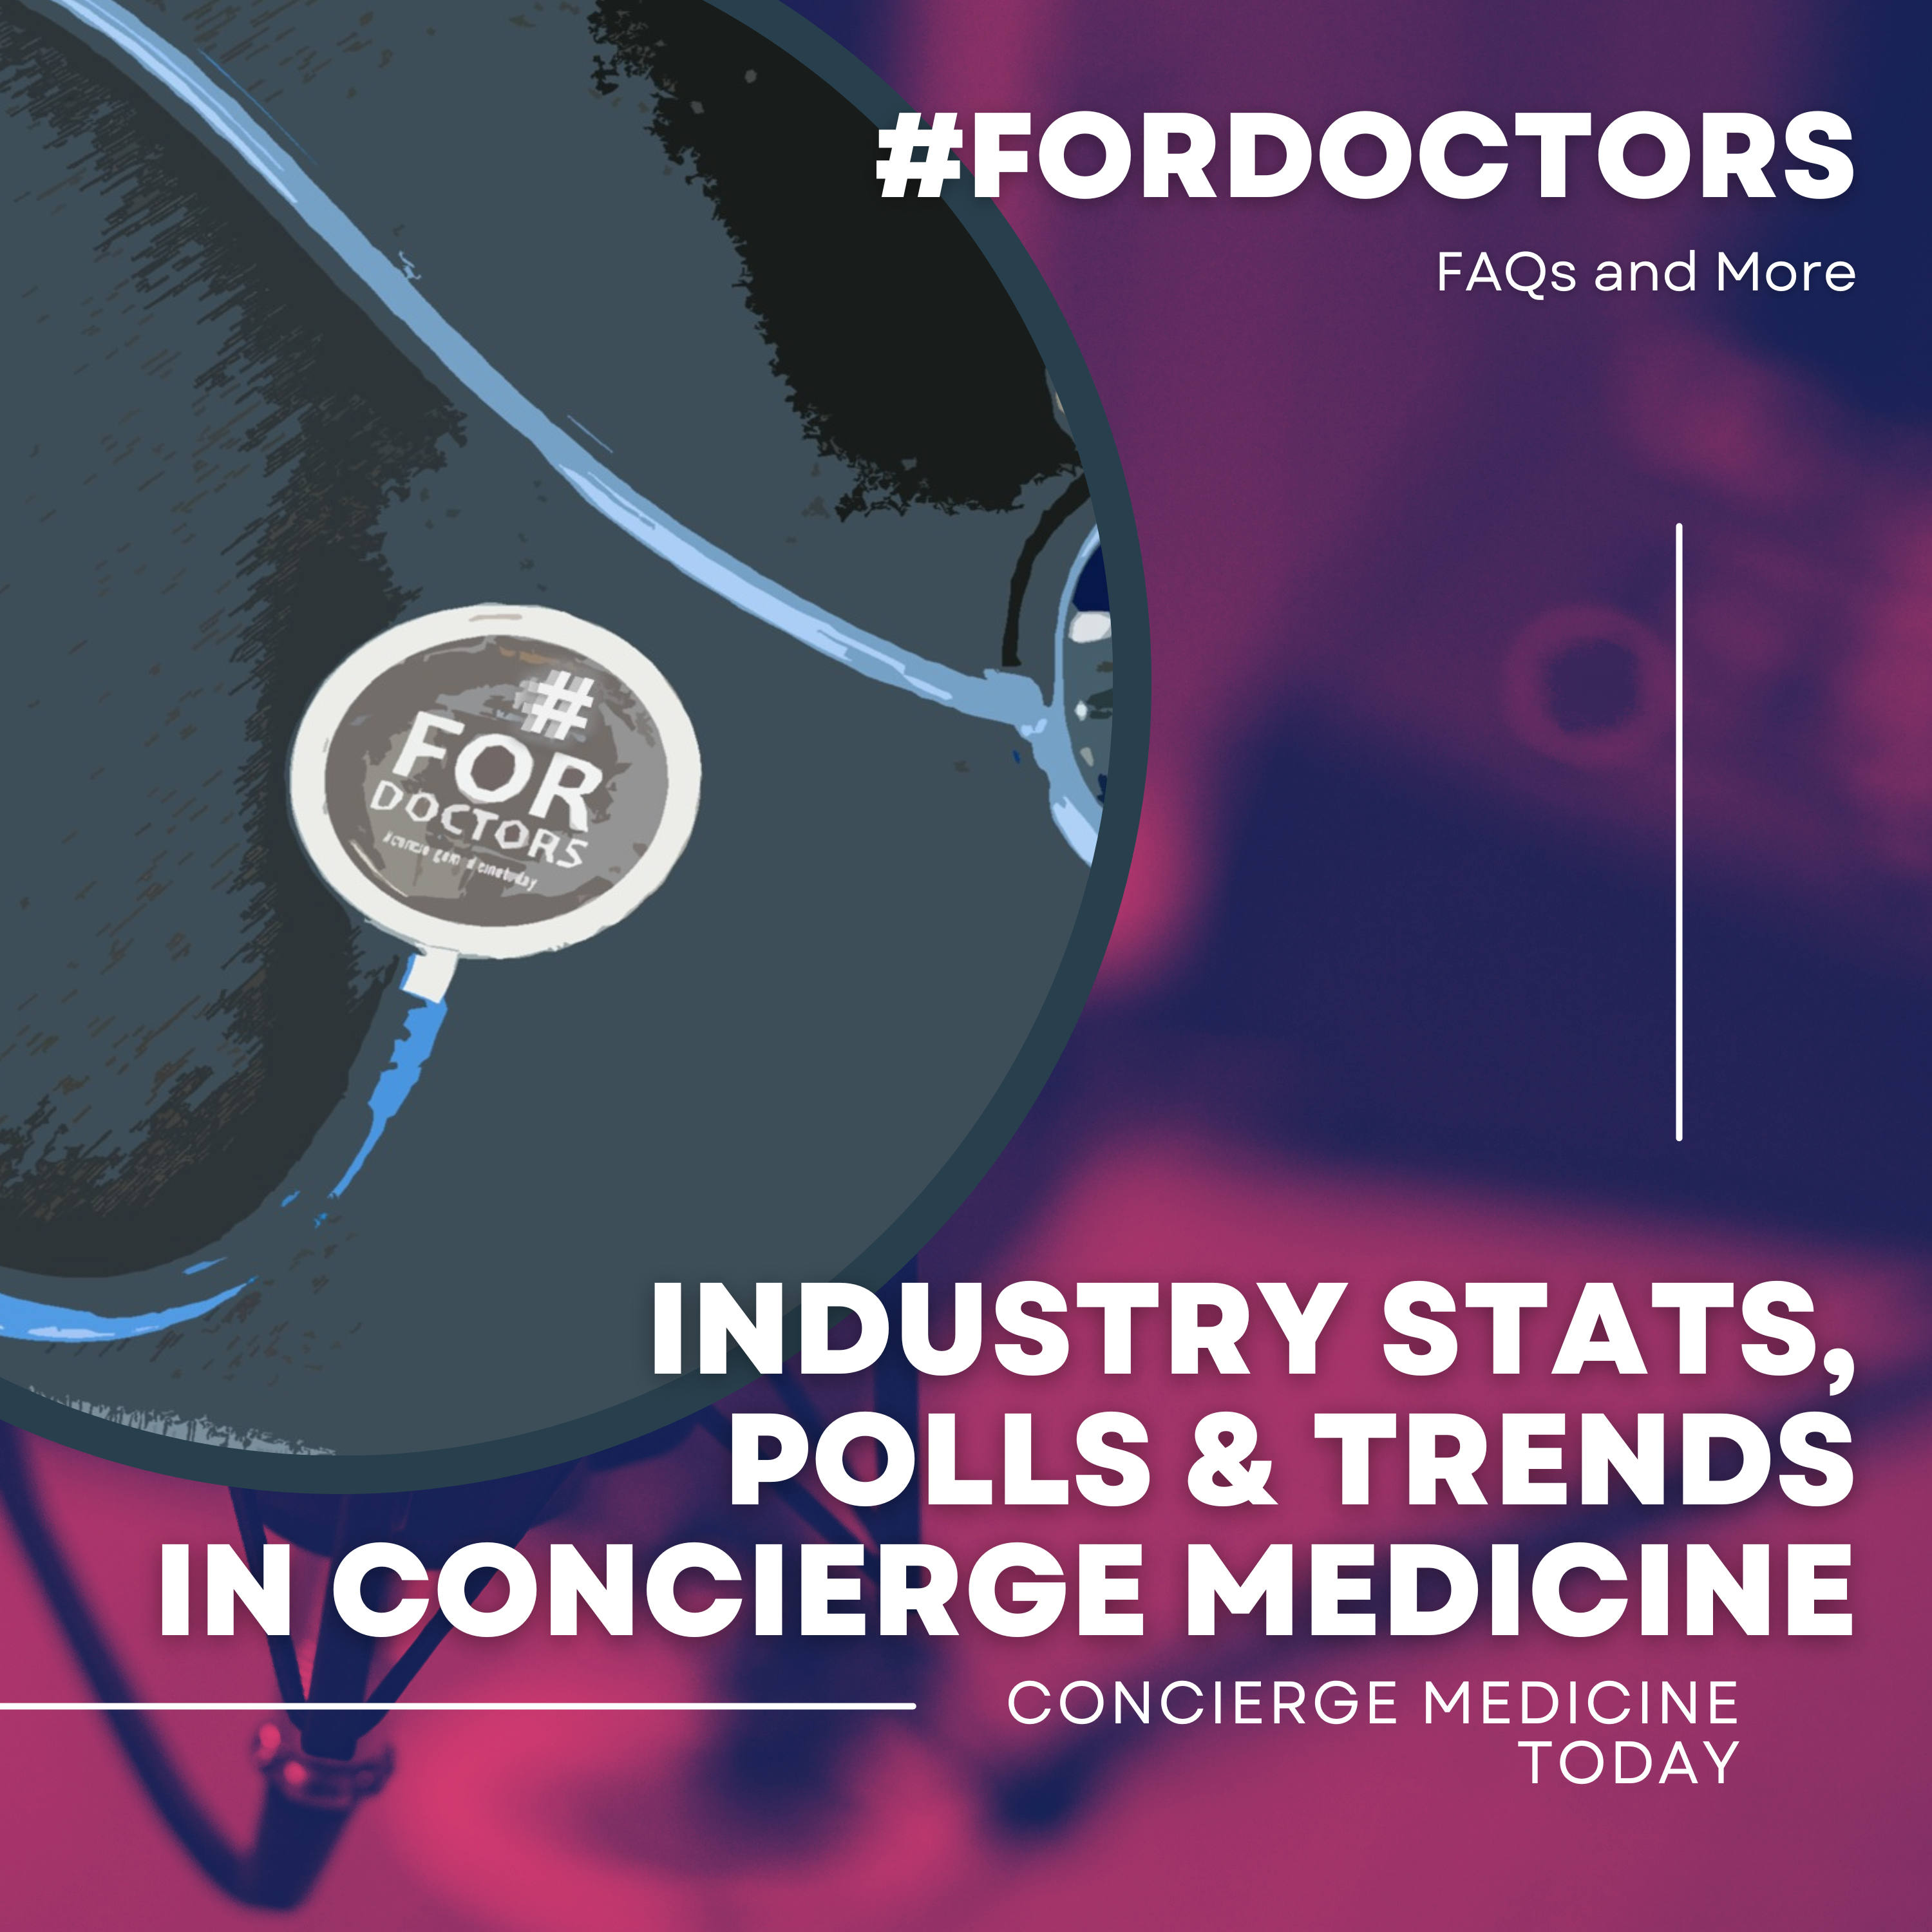 2023: What is the average wait time at your Concierge Practice?